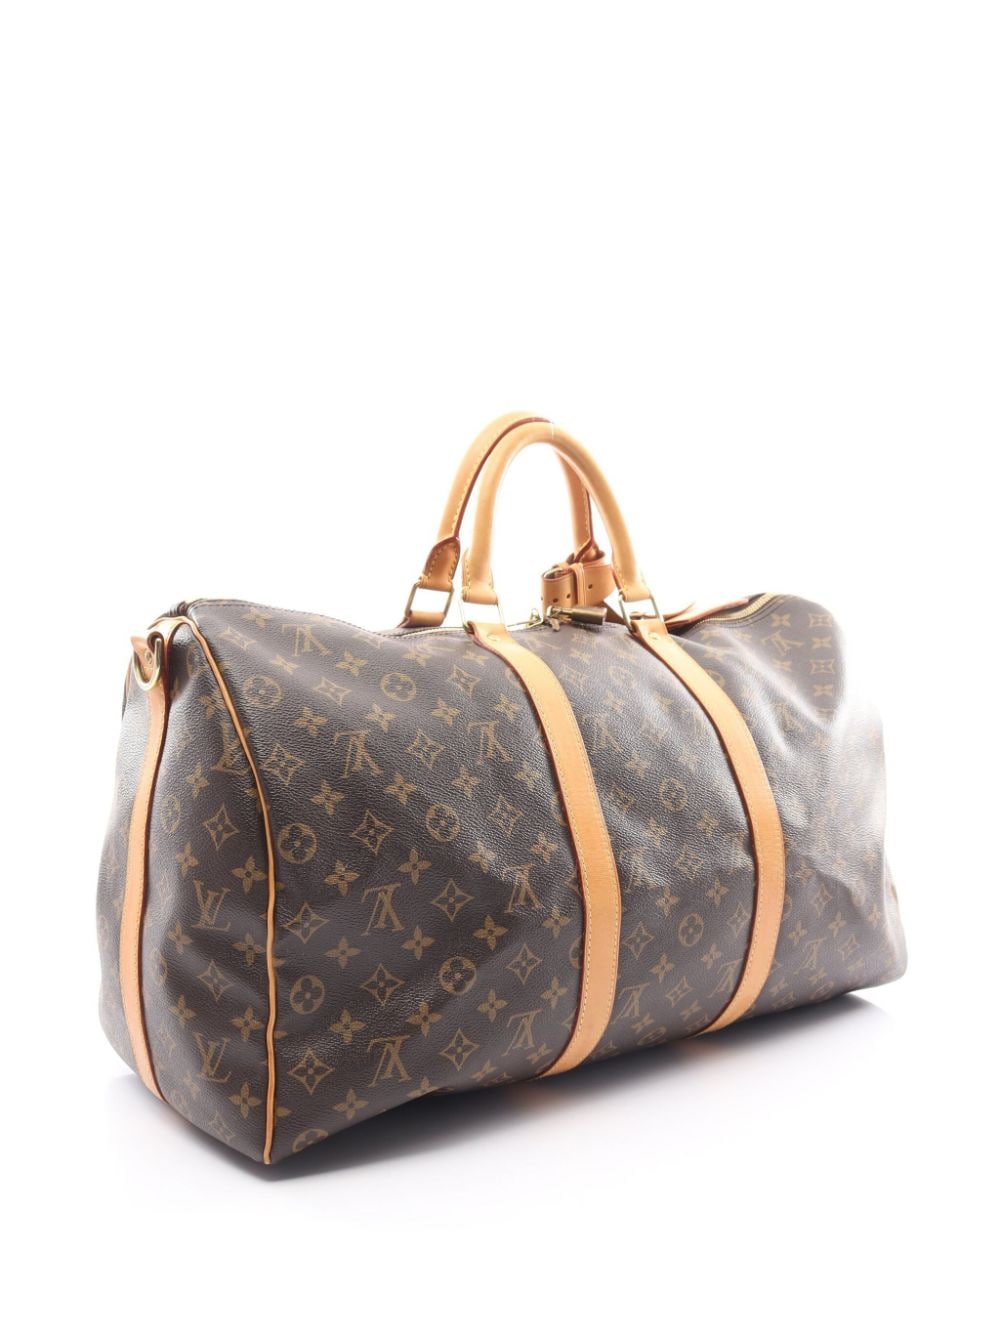 Louis Vuitton 2020s pre-owned Keepall Bandouliere 25 Tote Bag